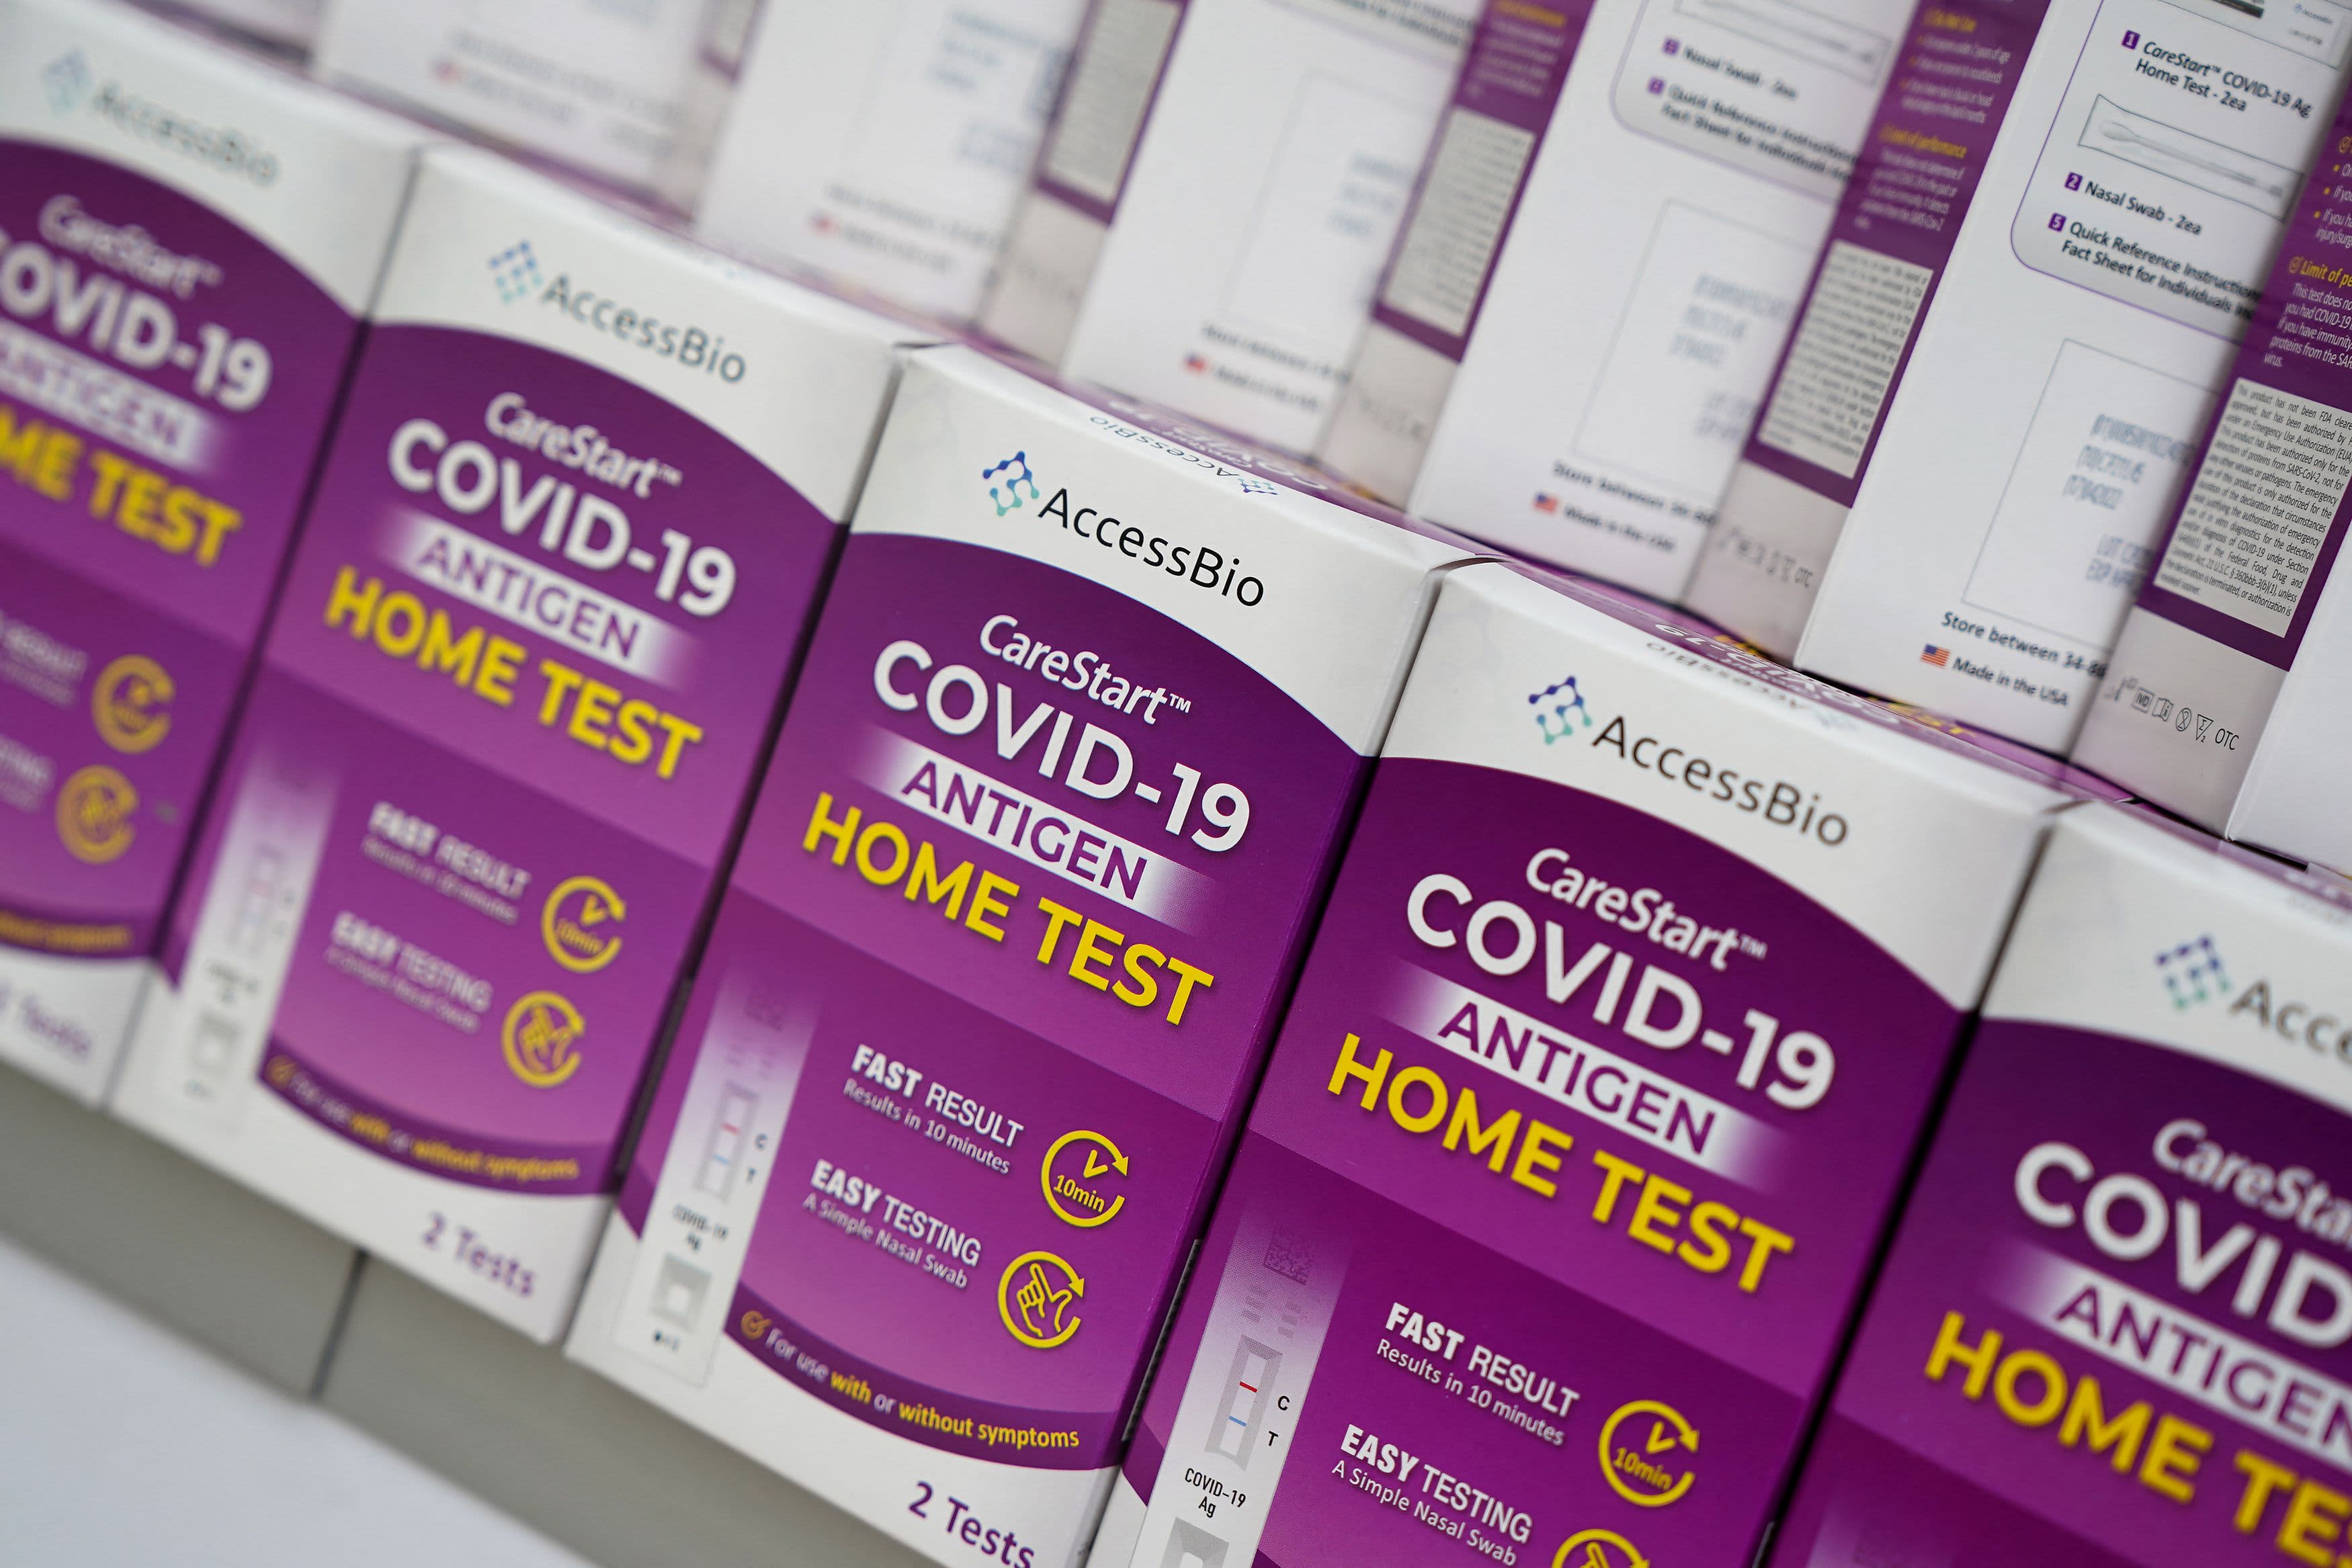 Free at-home Covid tests are available from Monday